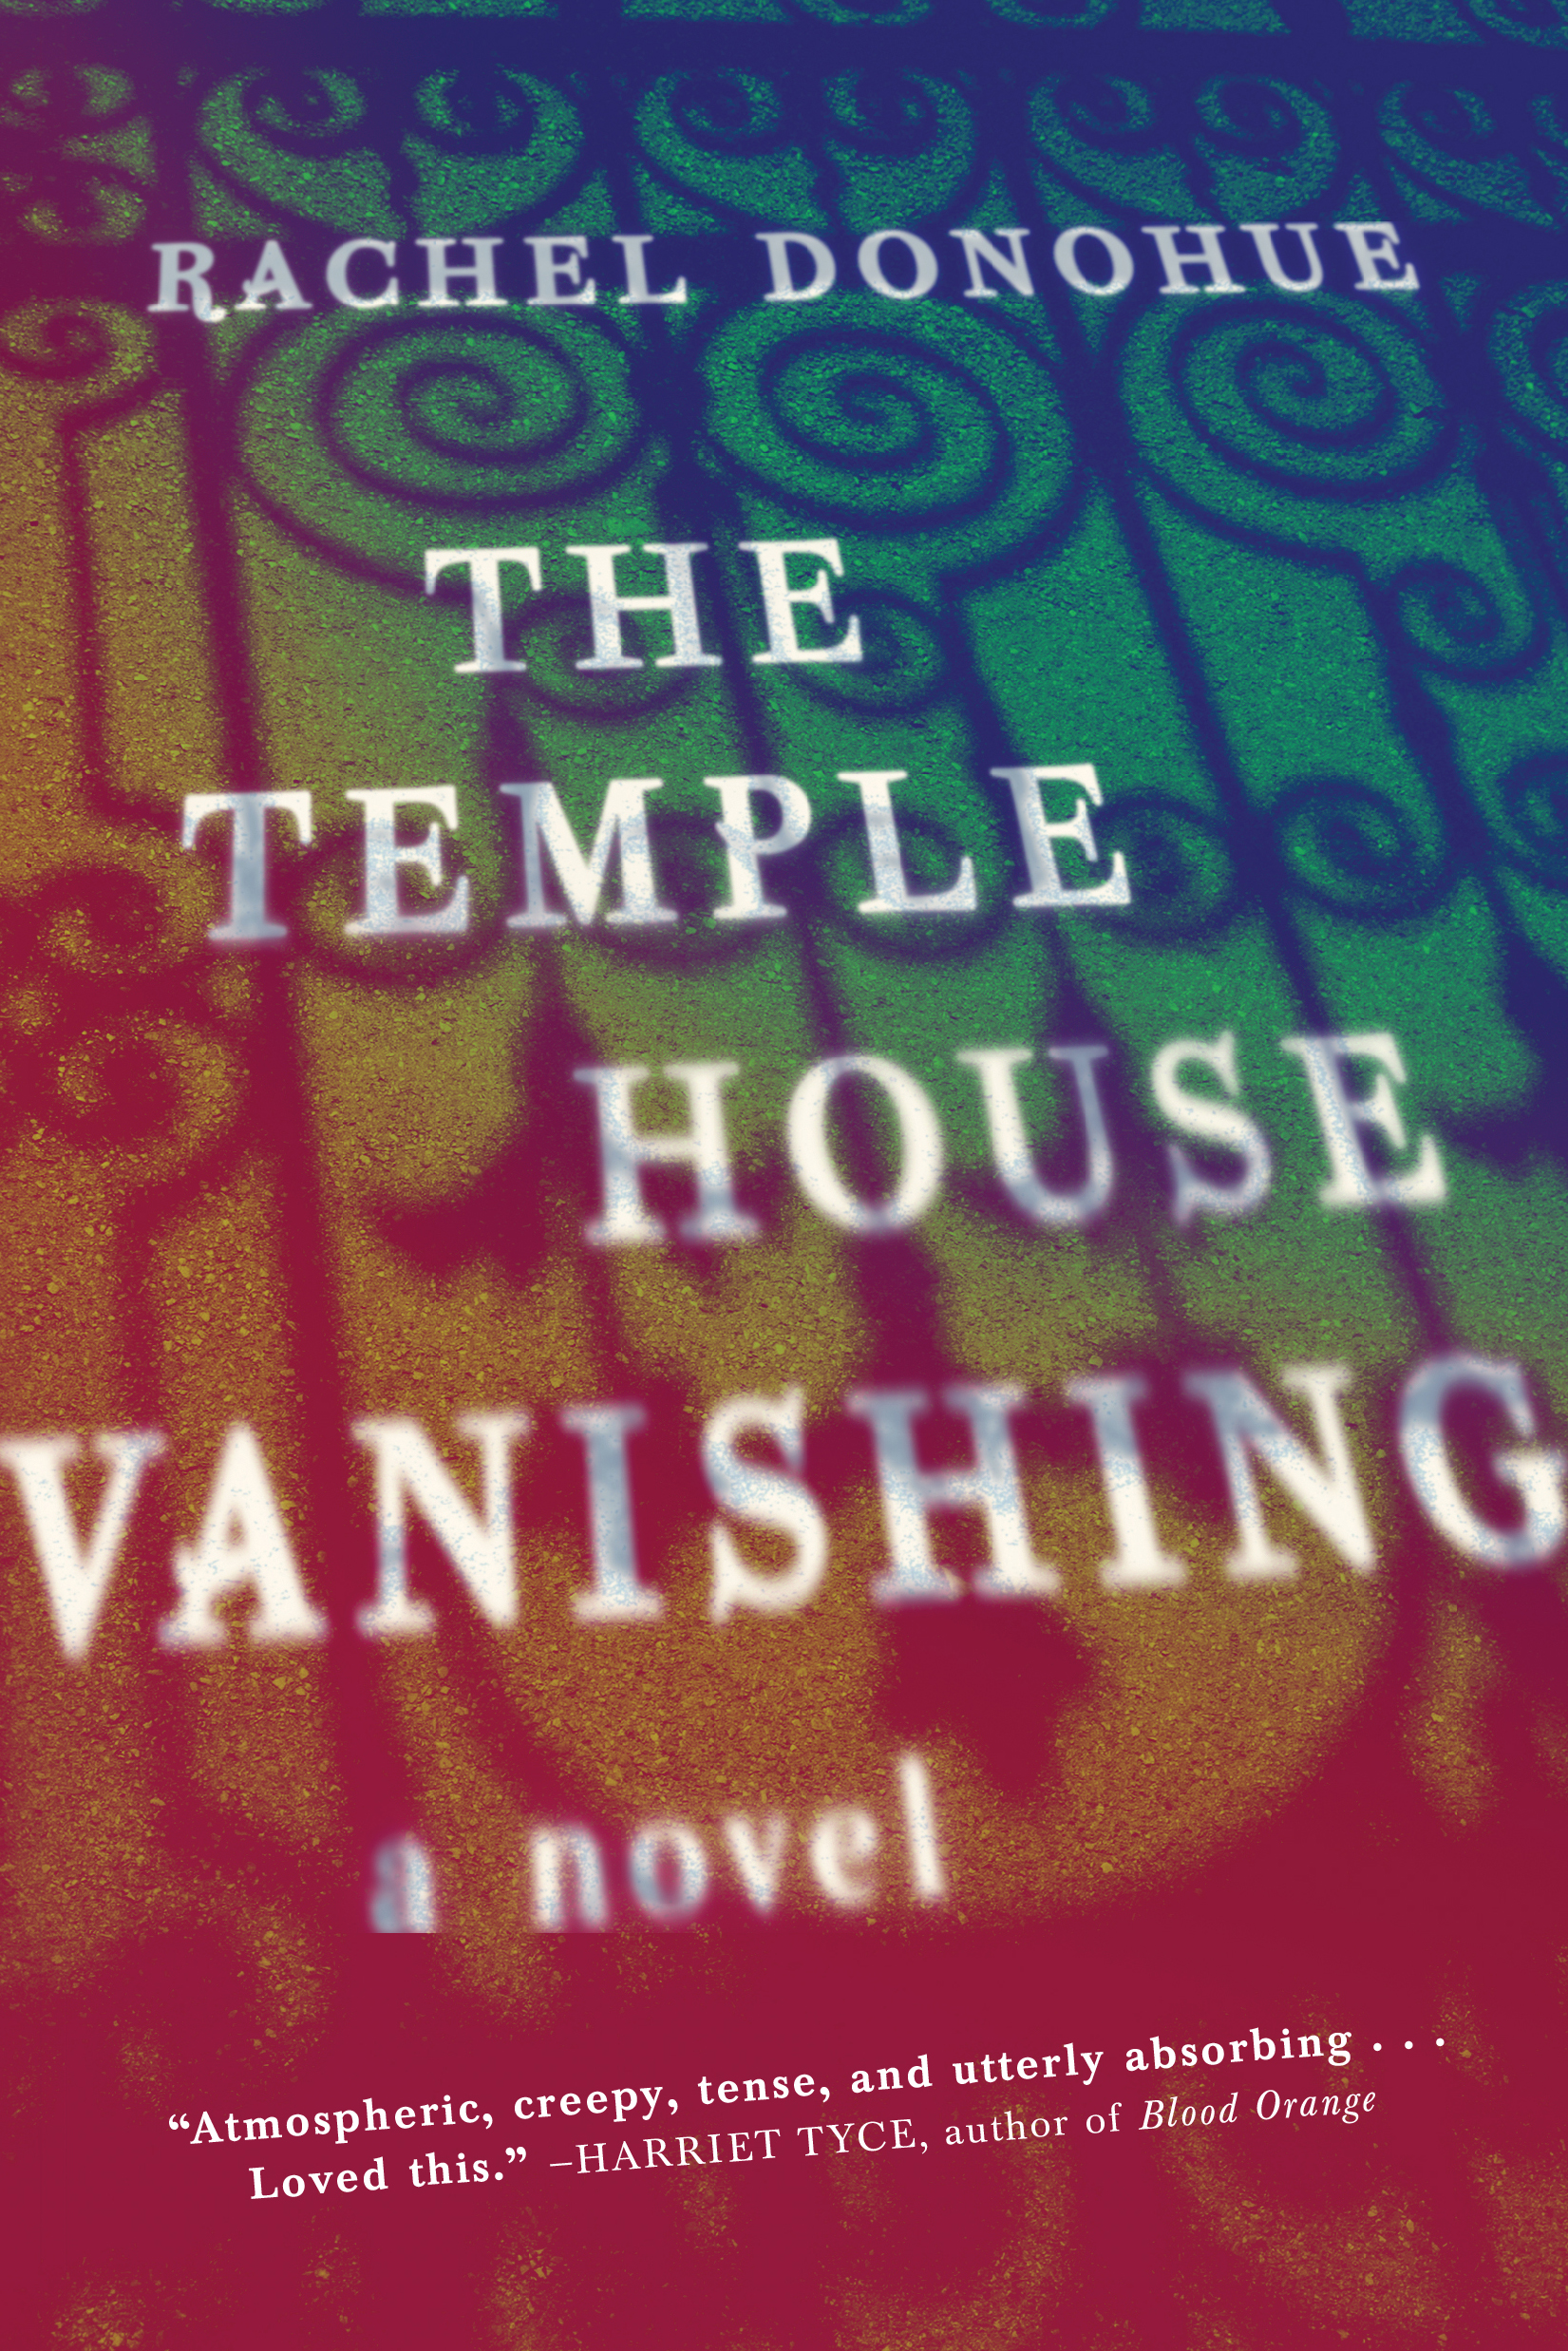 House　Donohue　Book　Temple　by　Rachel　Hachette　Group　The　Vanishing